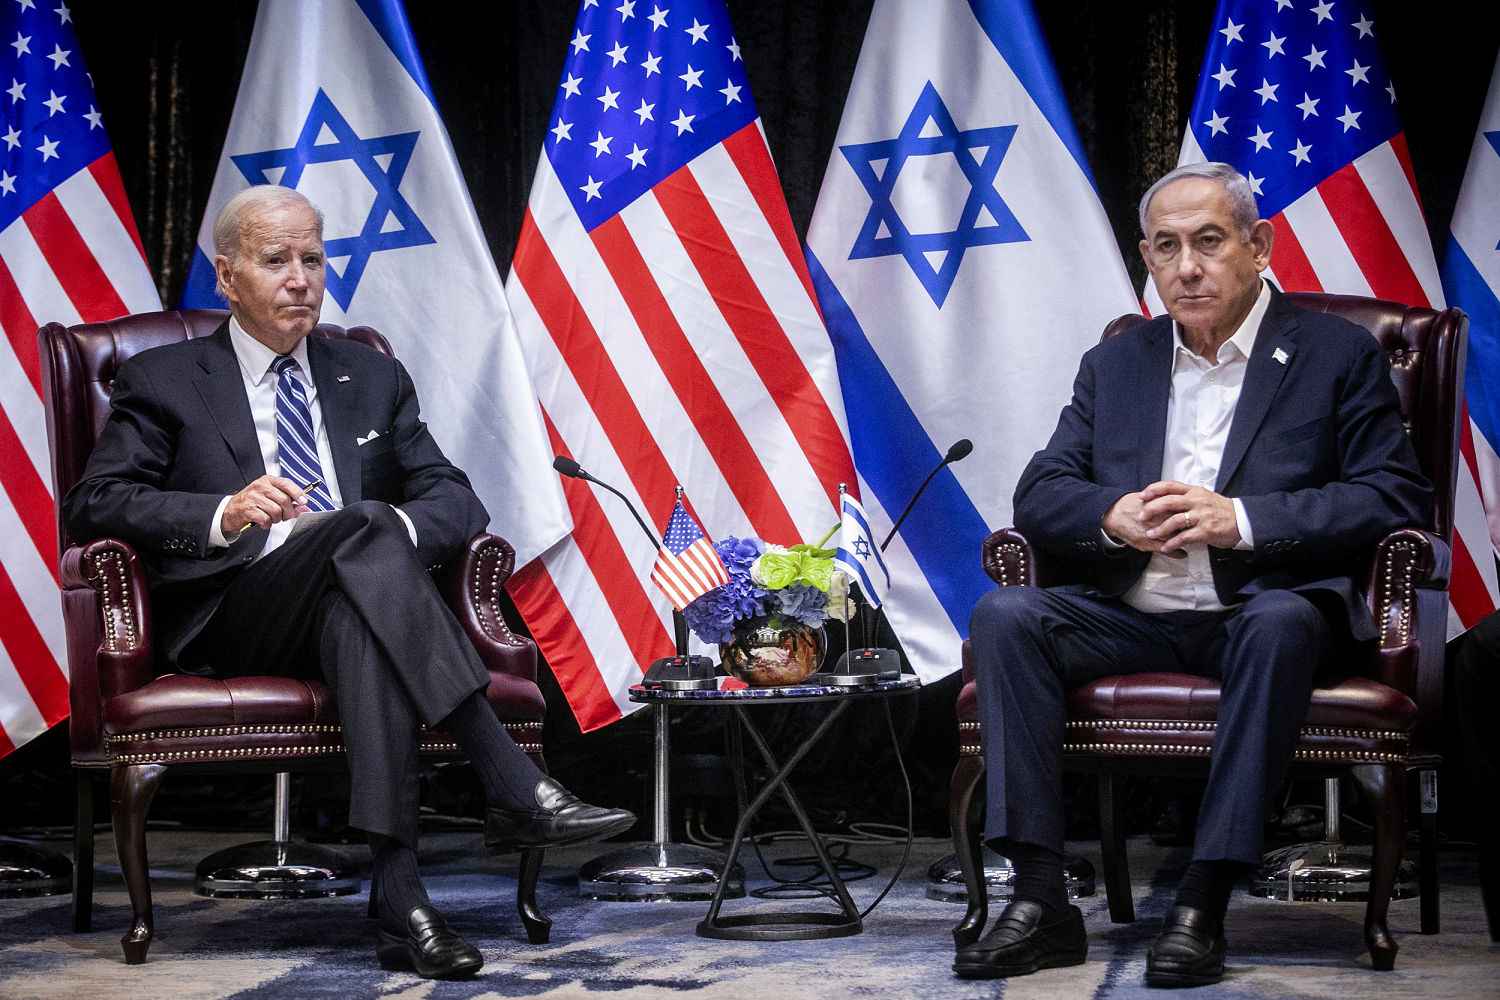 Biden administration is discussing slowing some weaponry deliveries to Israel to pressure Netanyahu